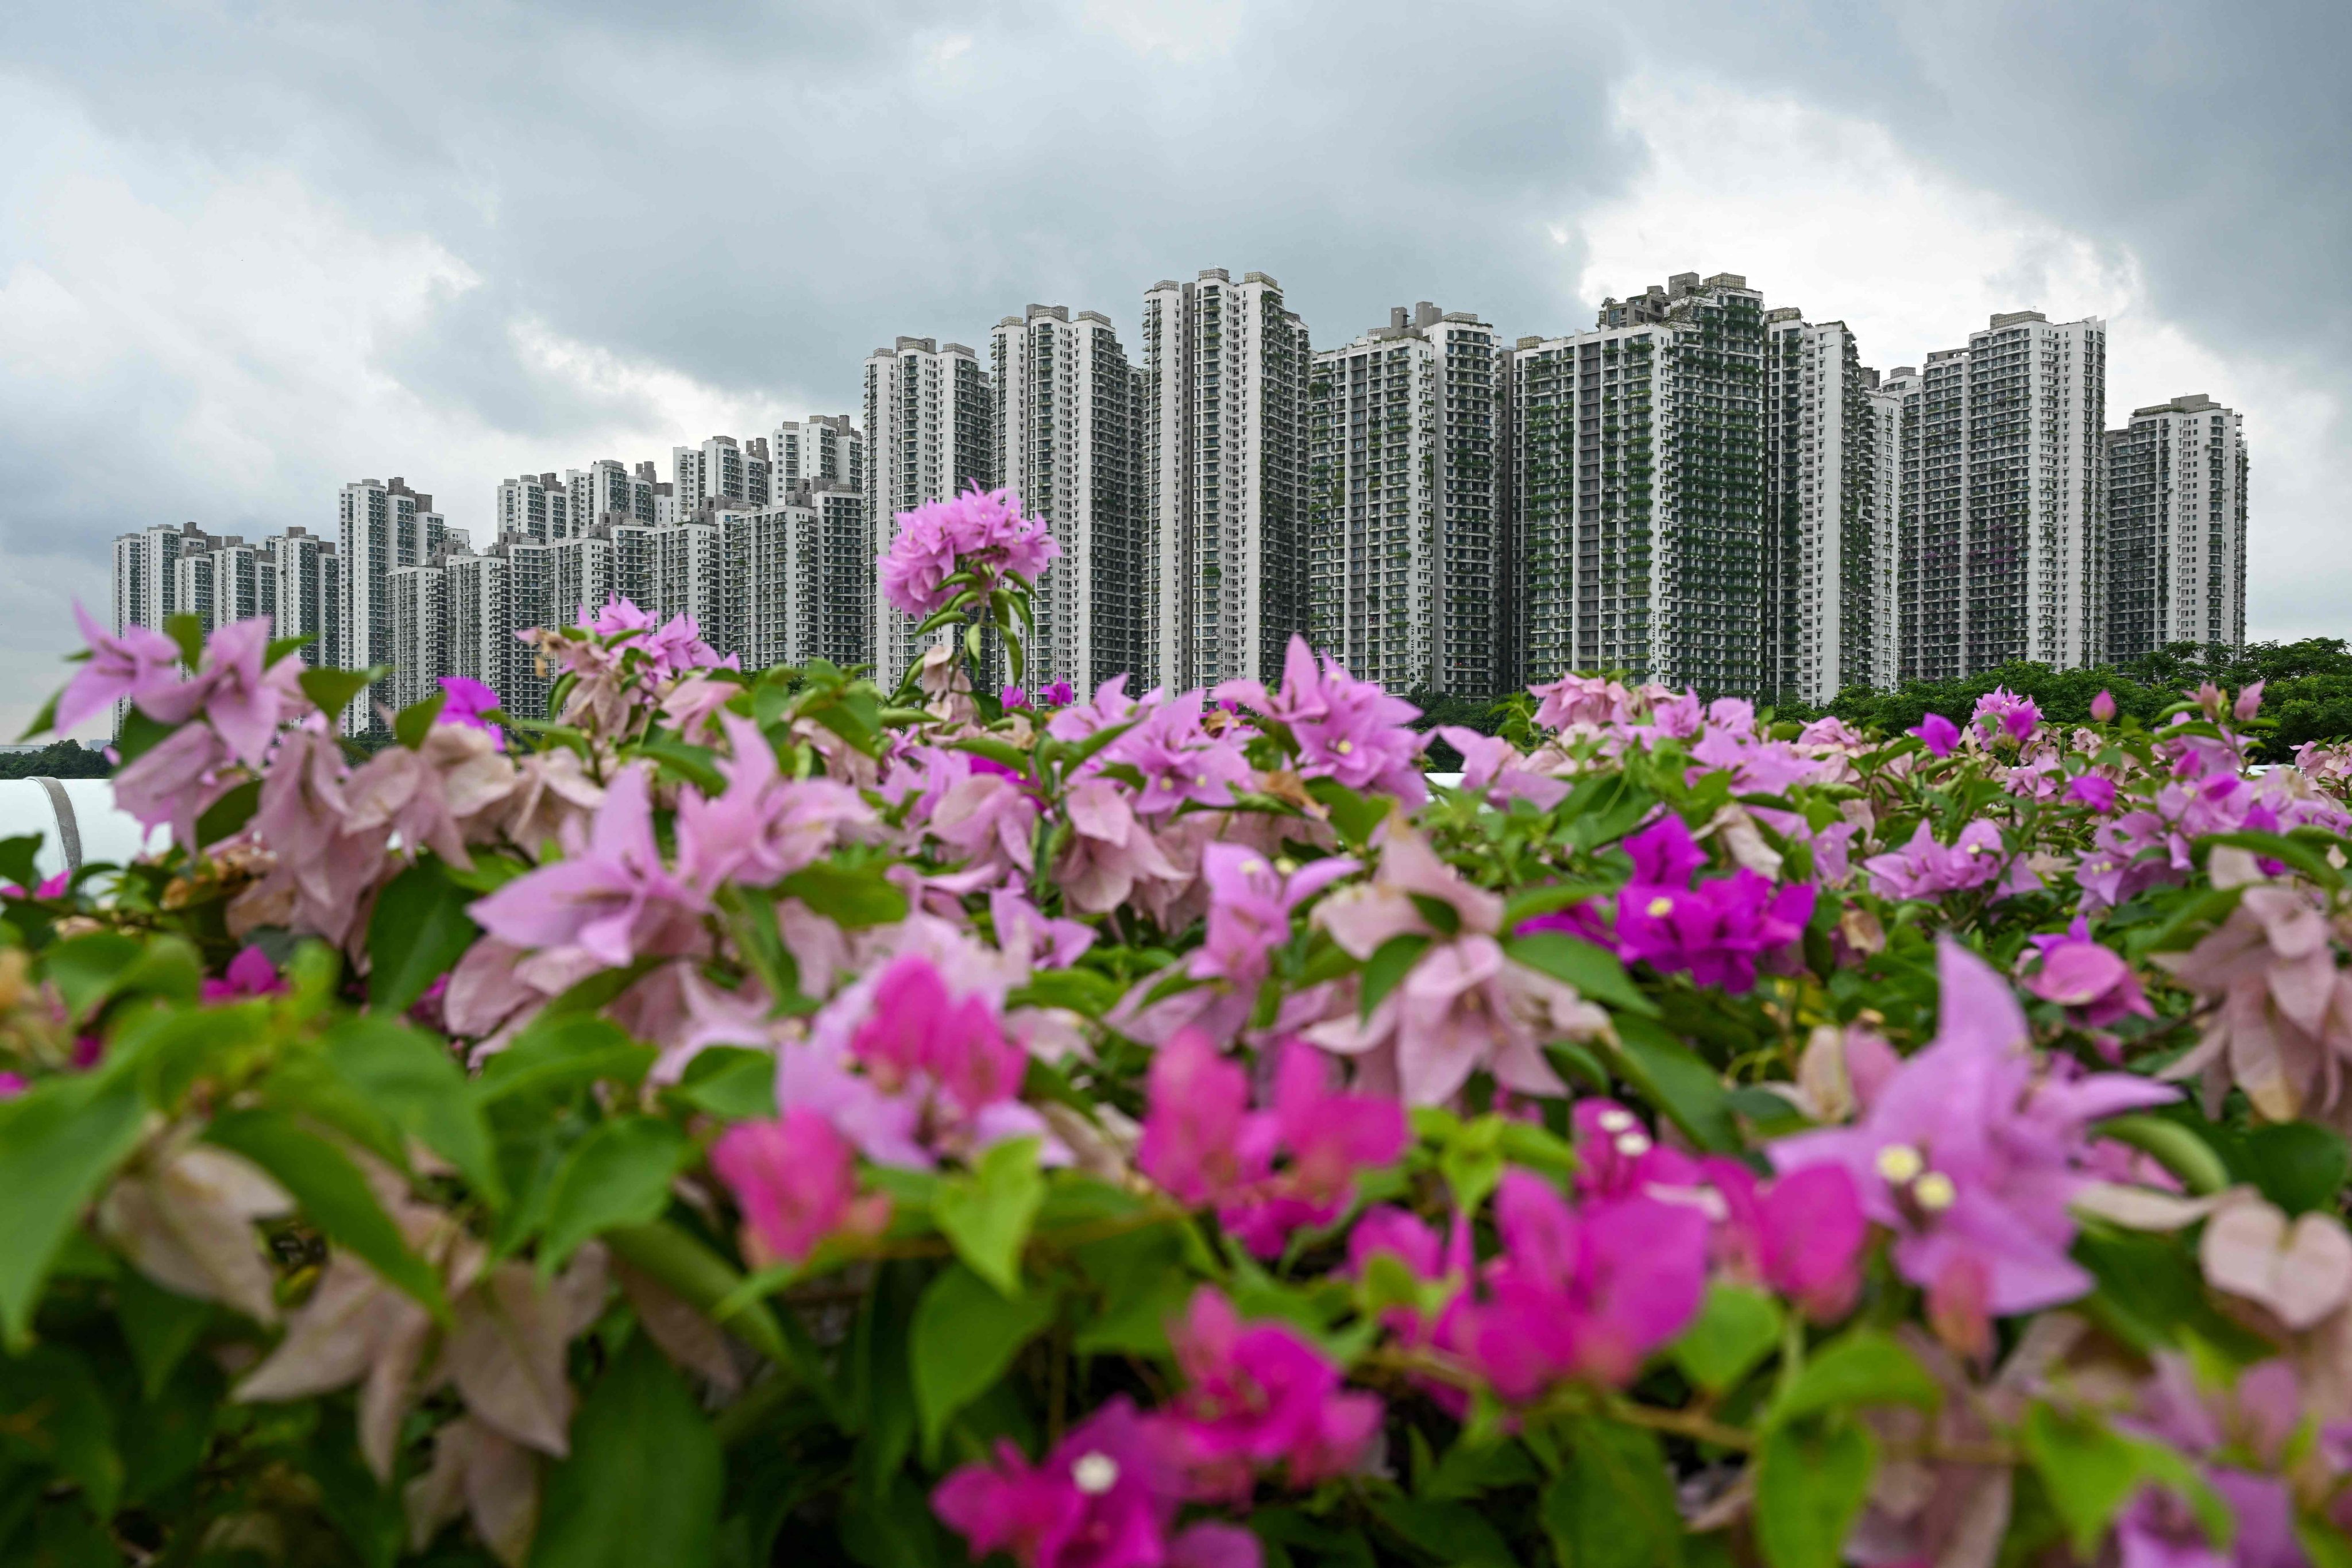 Malaysia’s US$100 billion China-backed ghost city was meant to house 700,000 people, Now, the mega-development is serving as a set for a handful of reality shows and documentaries. Photo: AFP